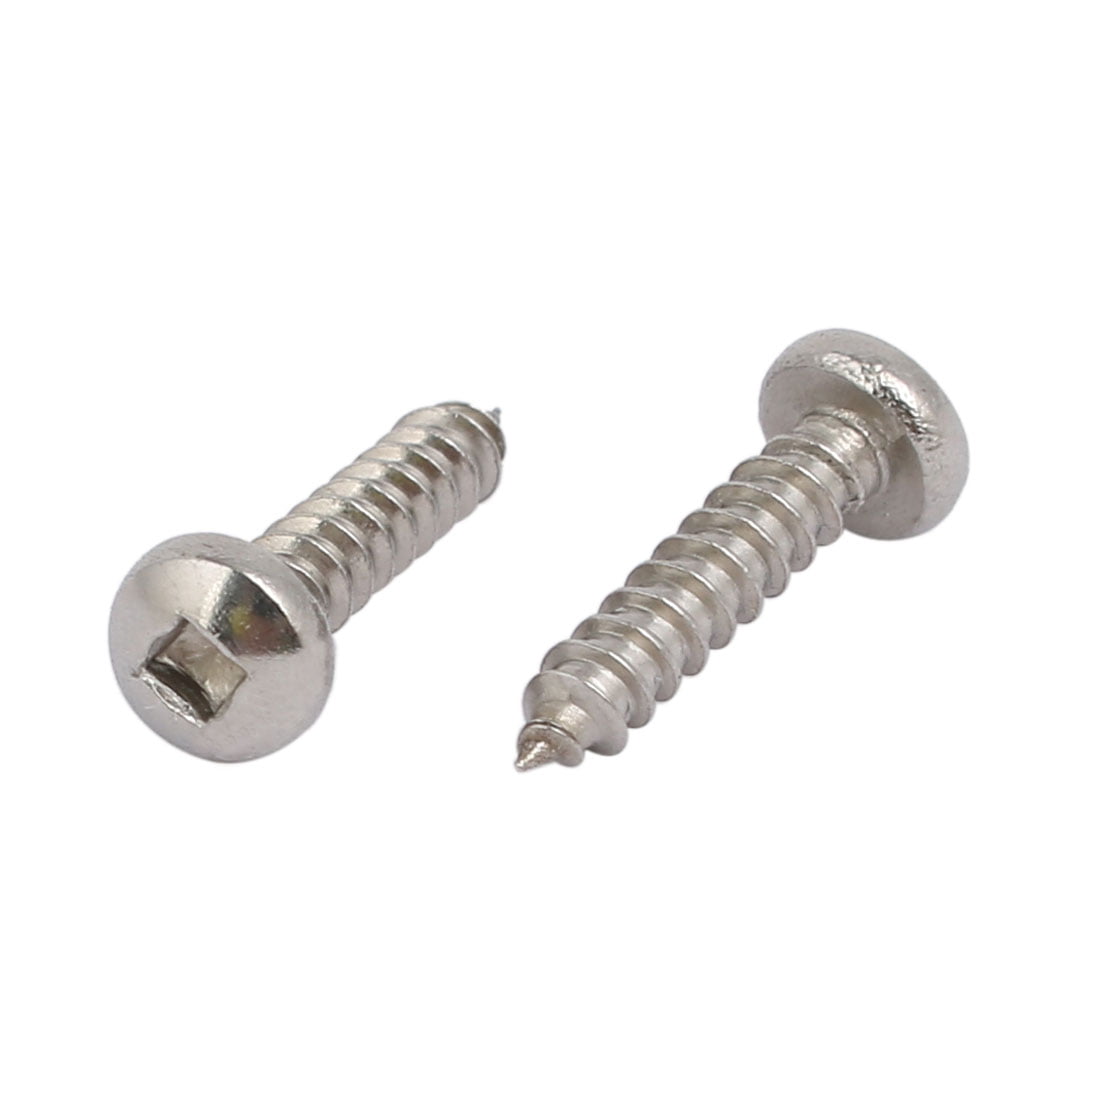 M2.9x13mm 304 Stainless Steel Square Drive Pan Head Self Tapping Screw 20pcs 605322194217 